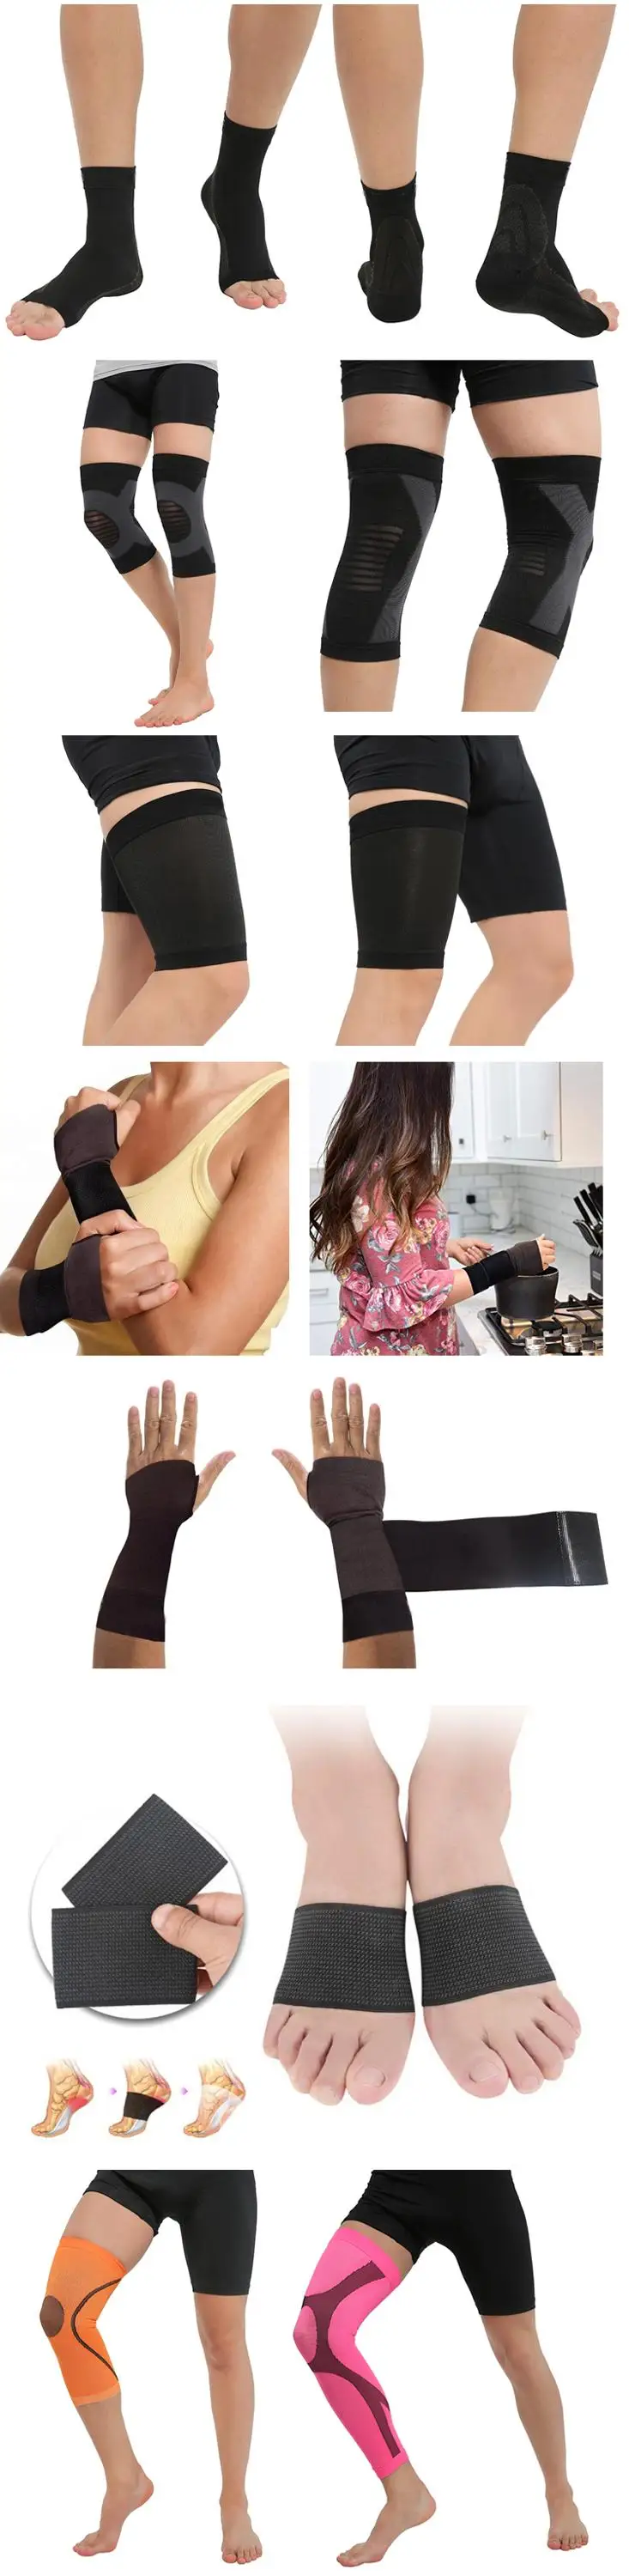 Nylon compression seamless elbow support arm sleeve